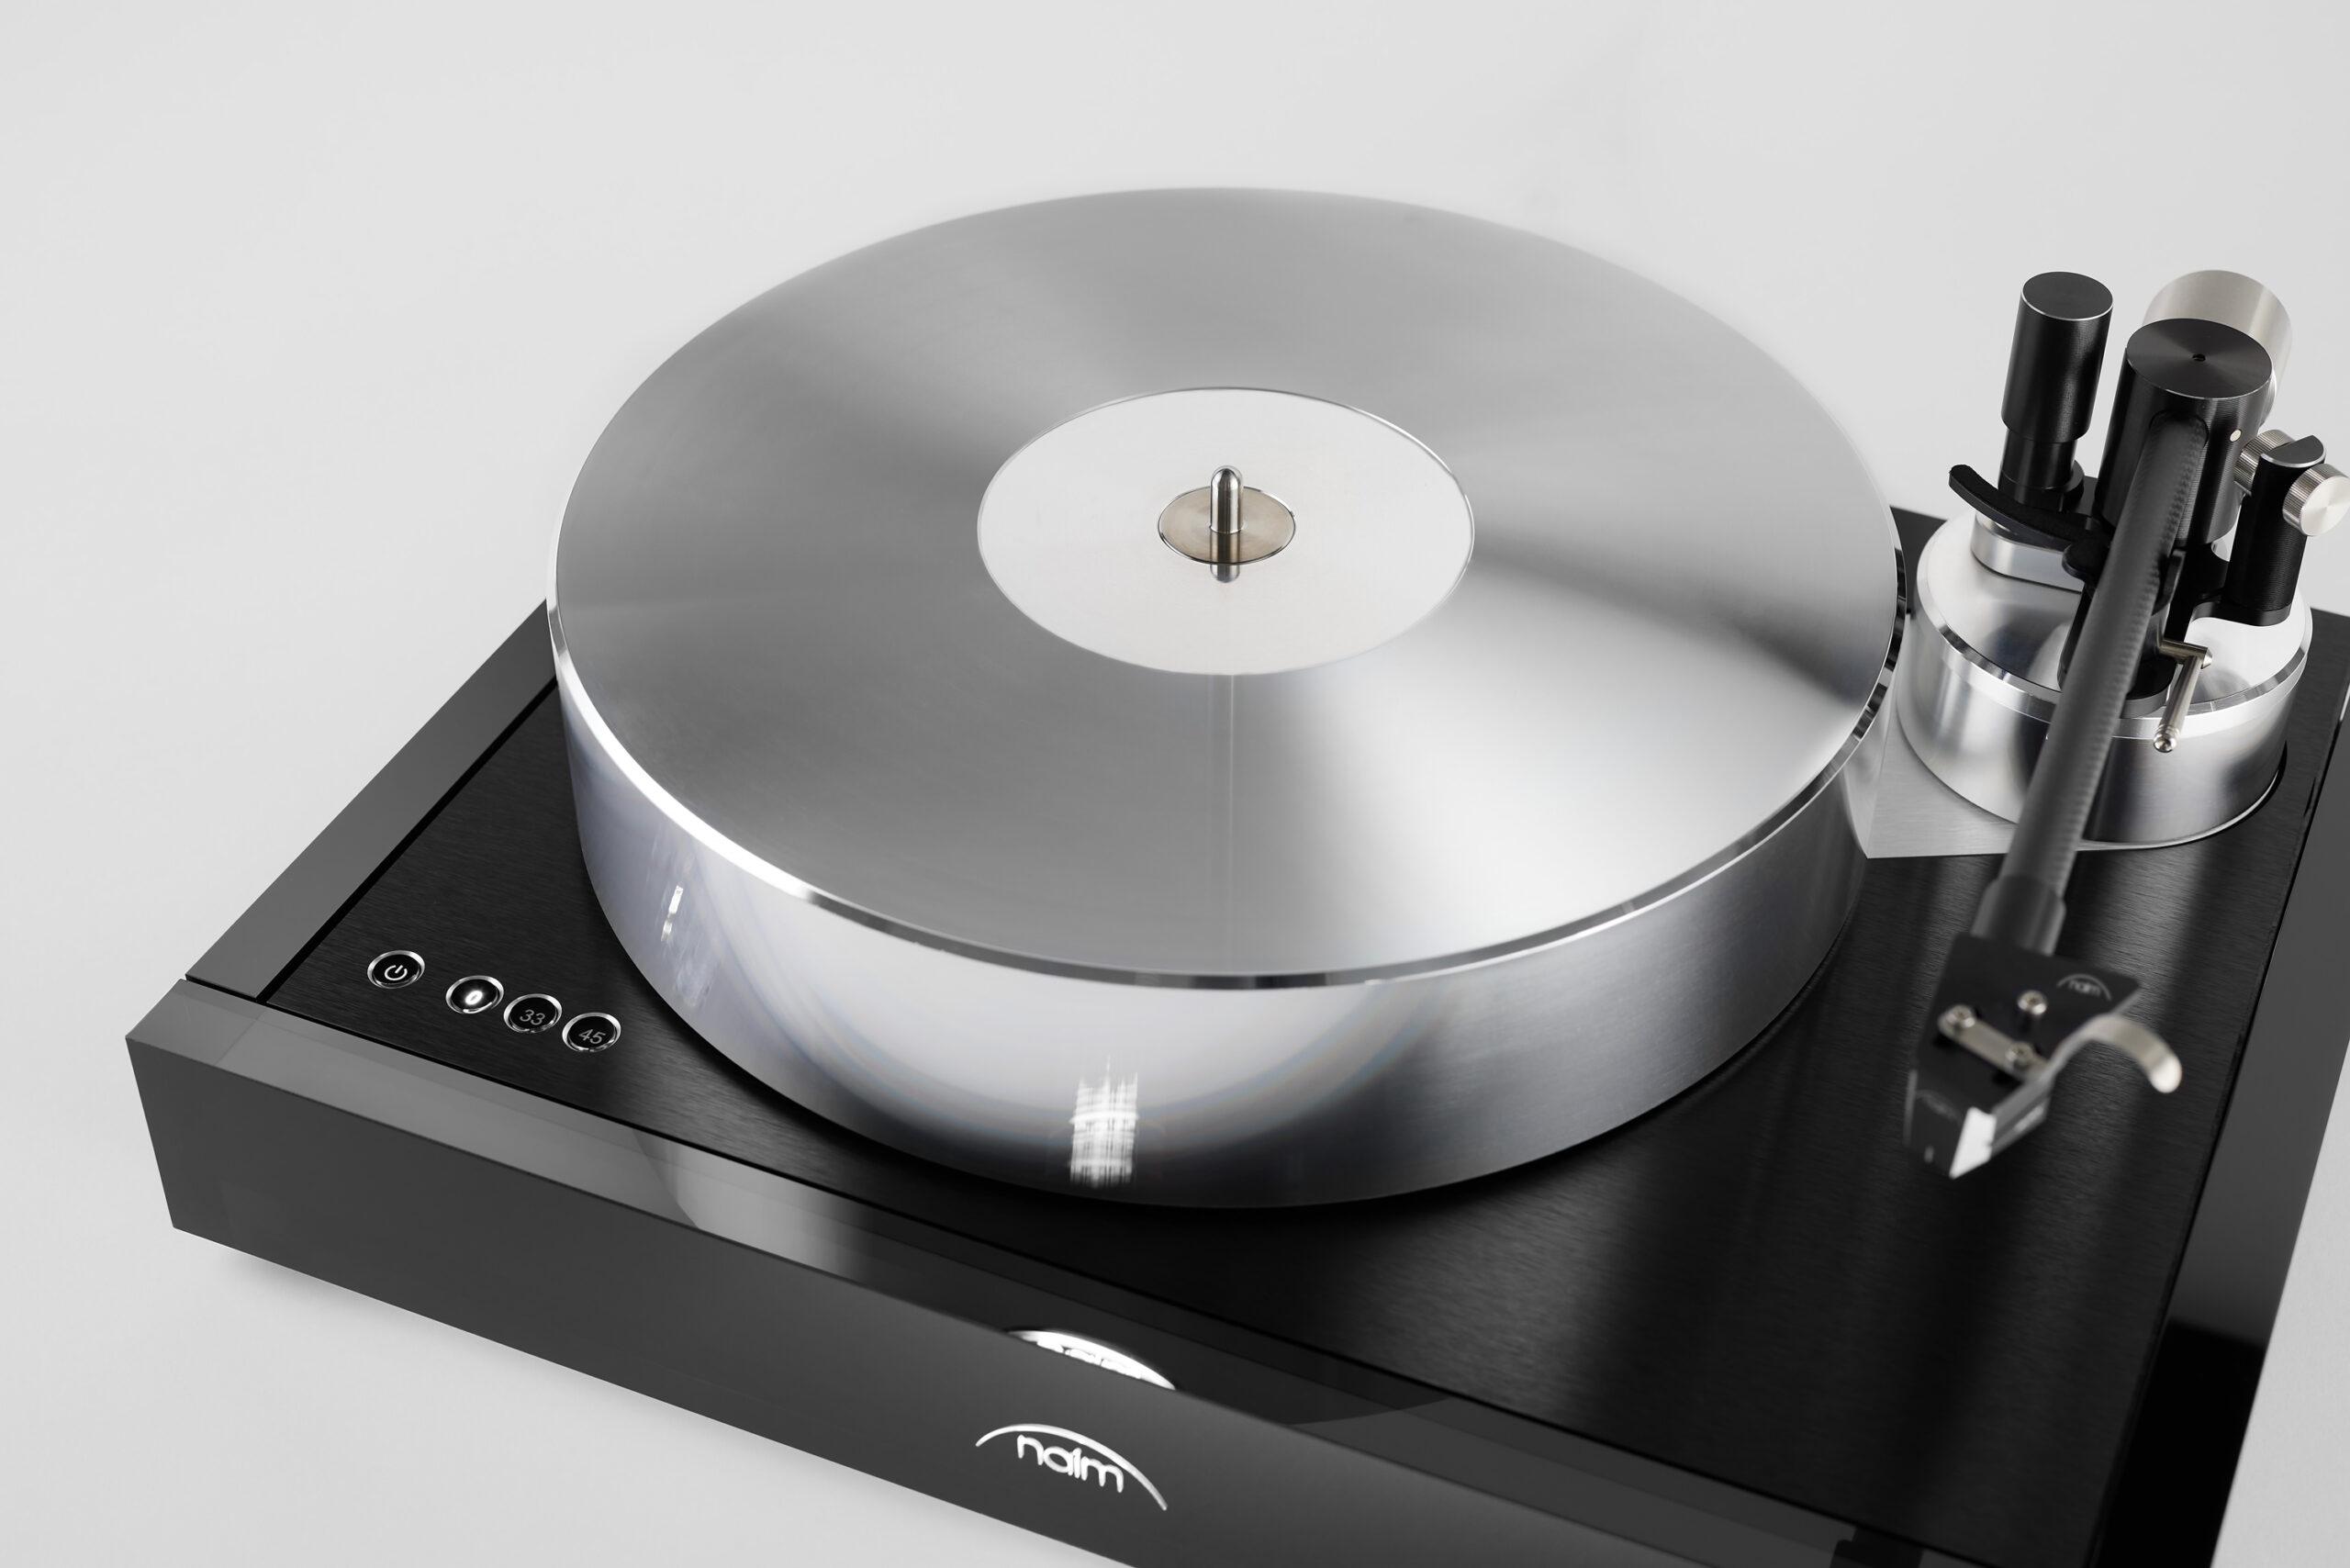 Vinyl-lovers can now finally enjoy the full Naim Audio experience with the launch of Solstice, the first turntable in the British brand’s almost 50-year history. 3075ce6b solstice special edition packshot 08 scaled